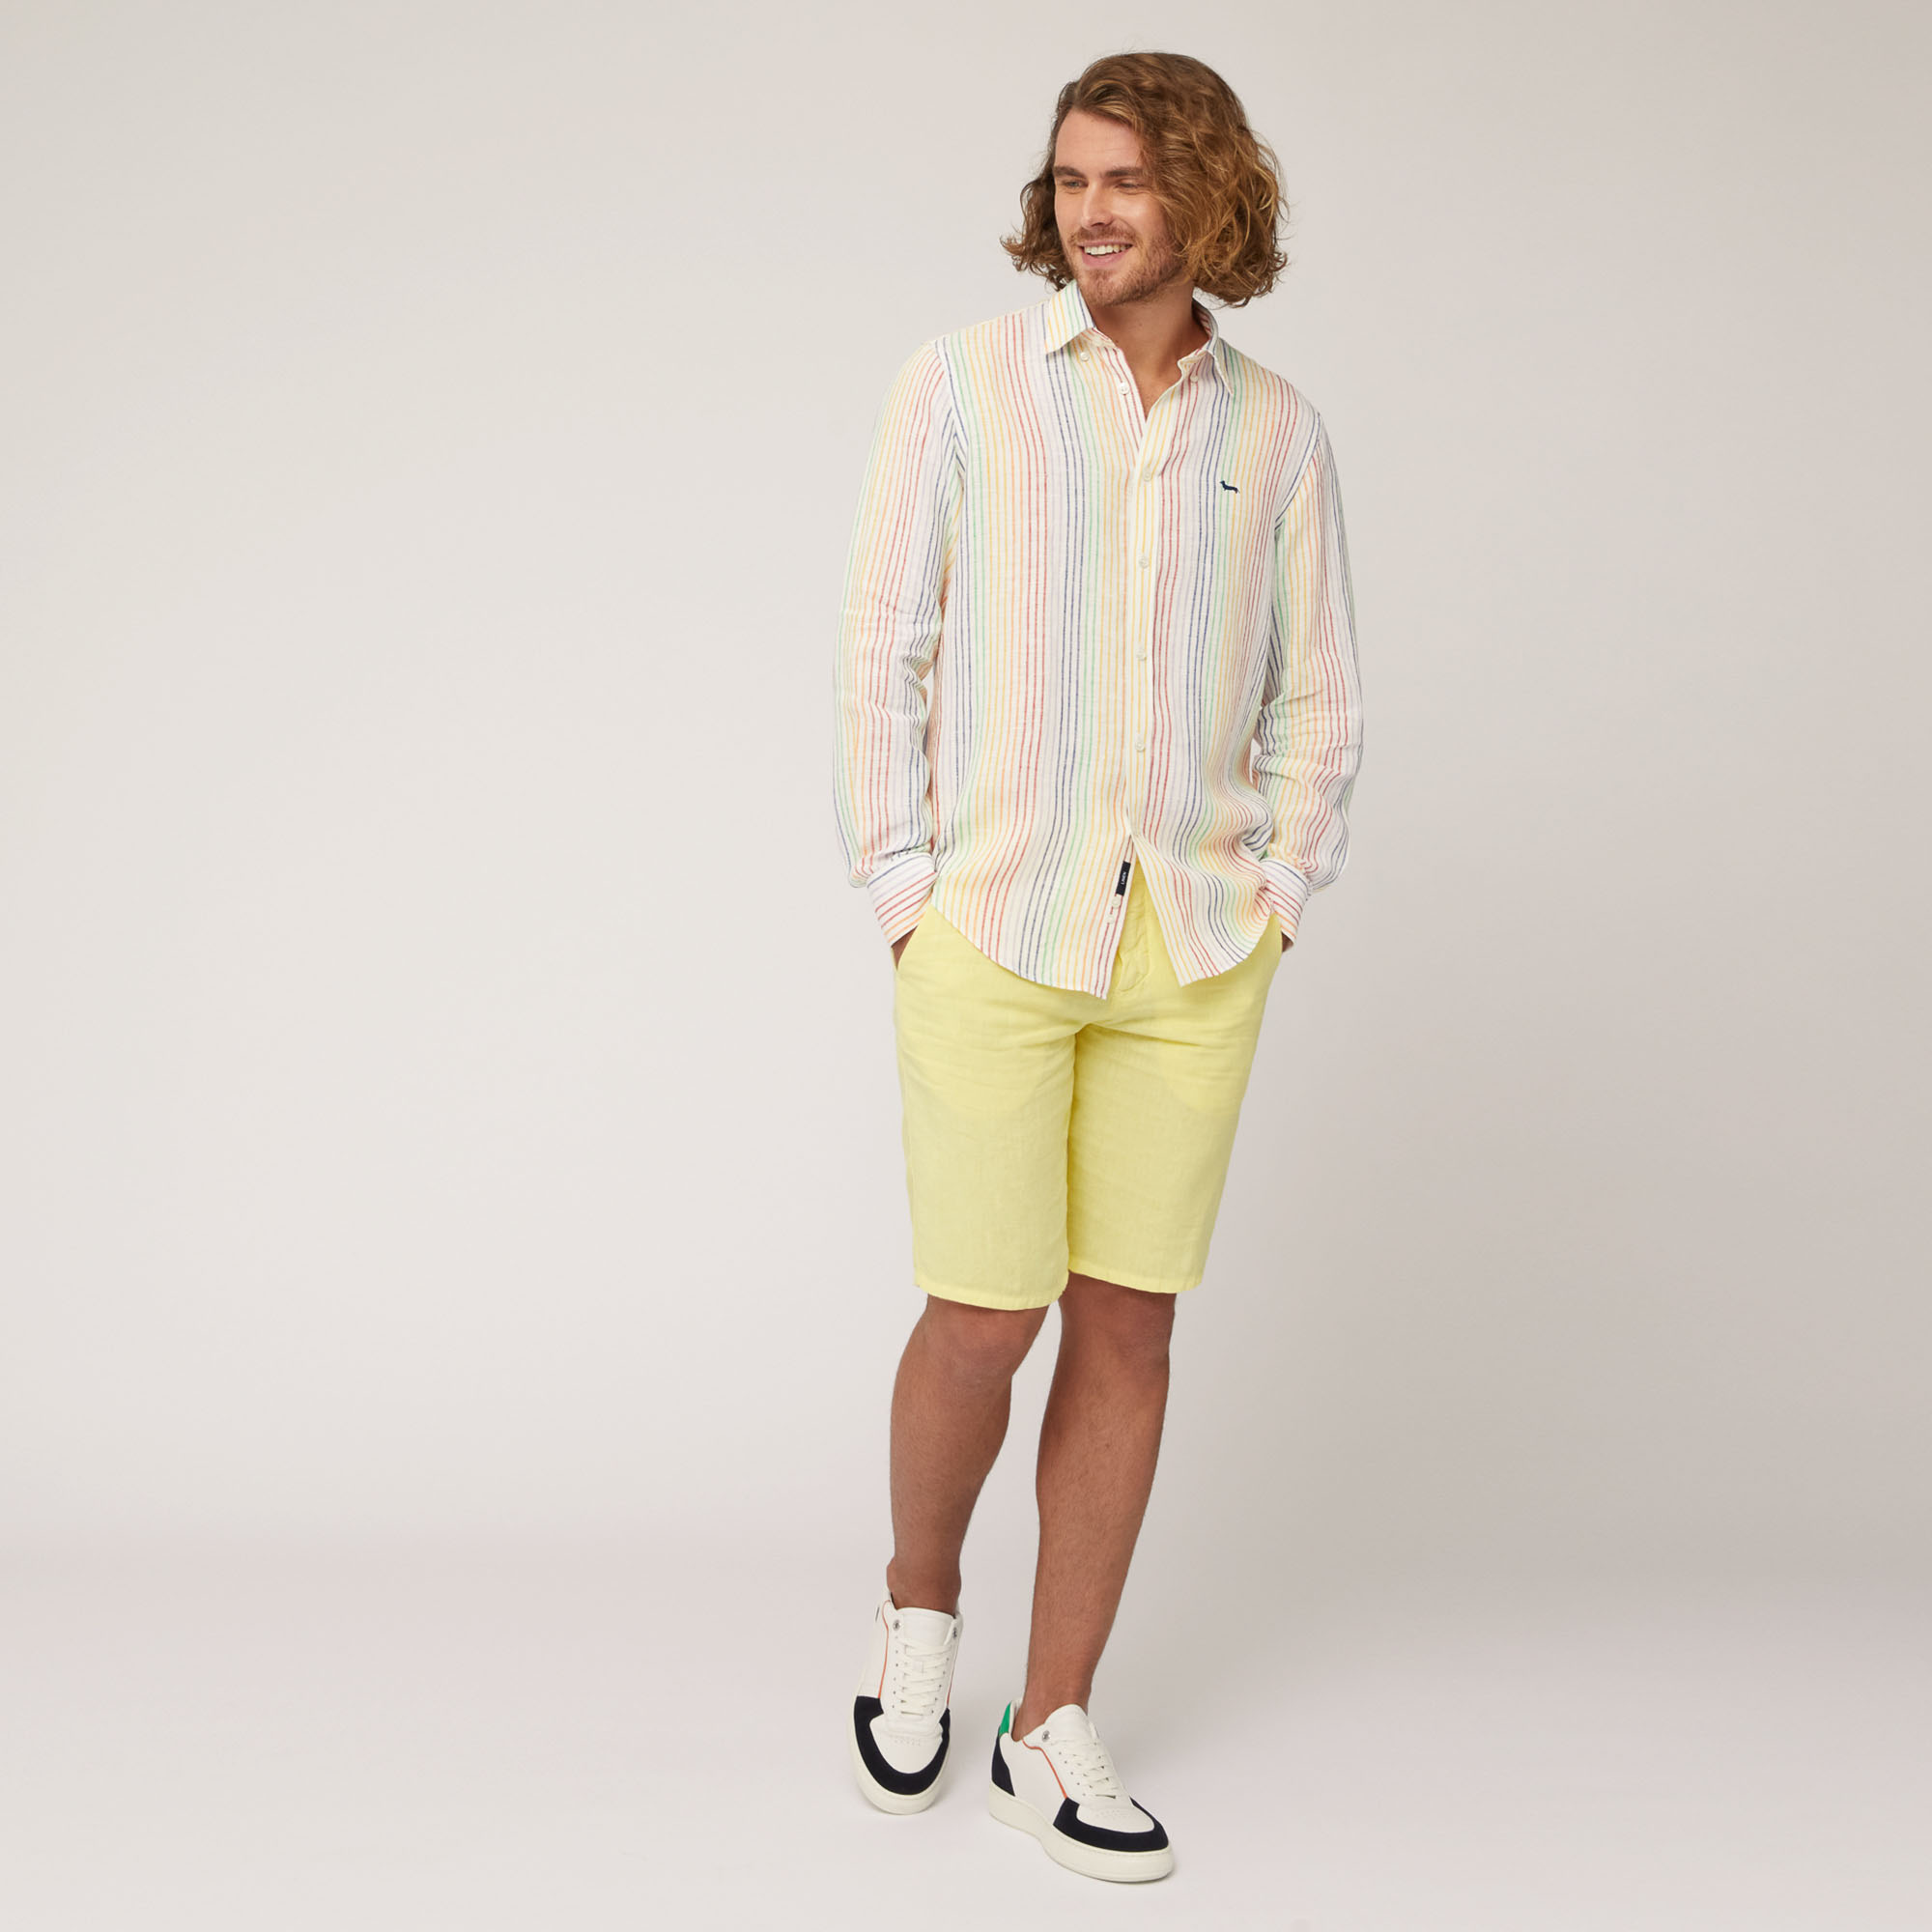 Rainbow Striped Linen Shirt, White, large image number 3